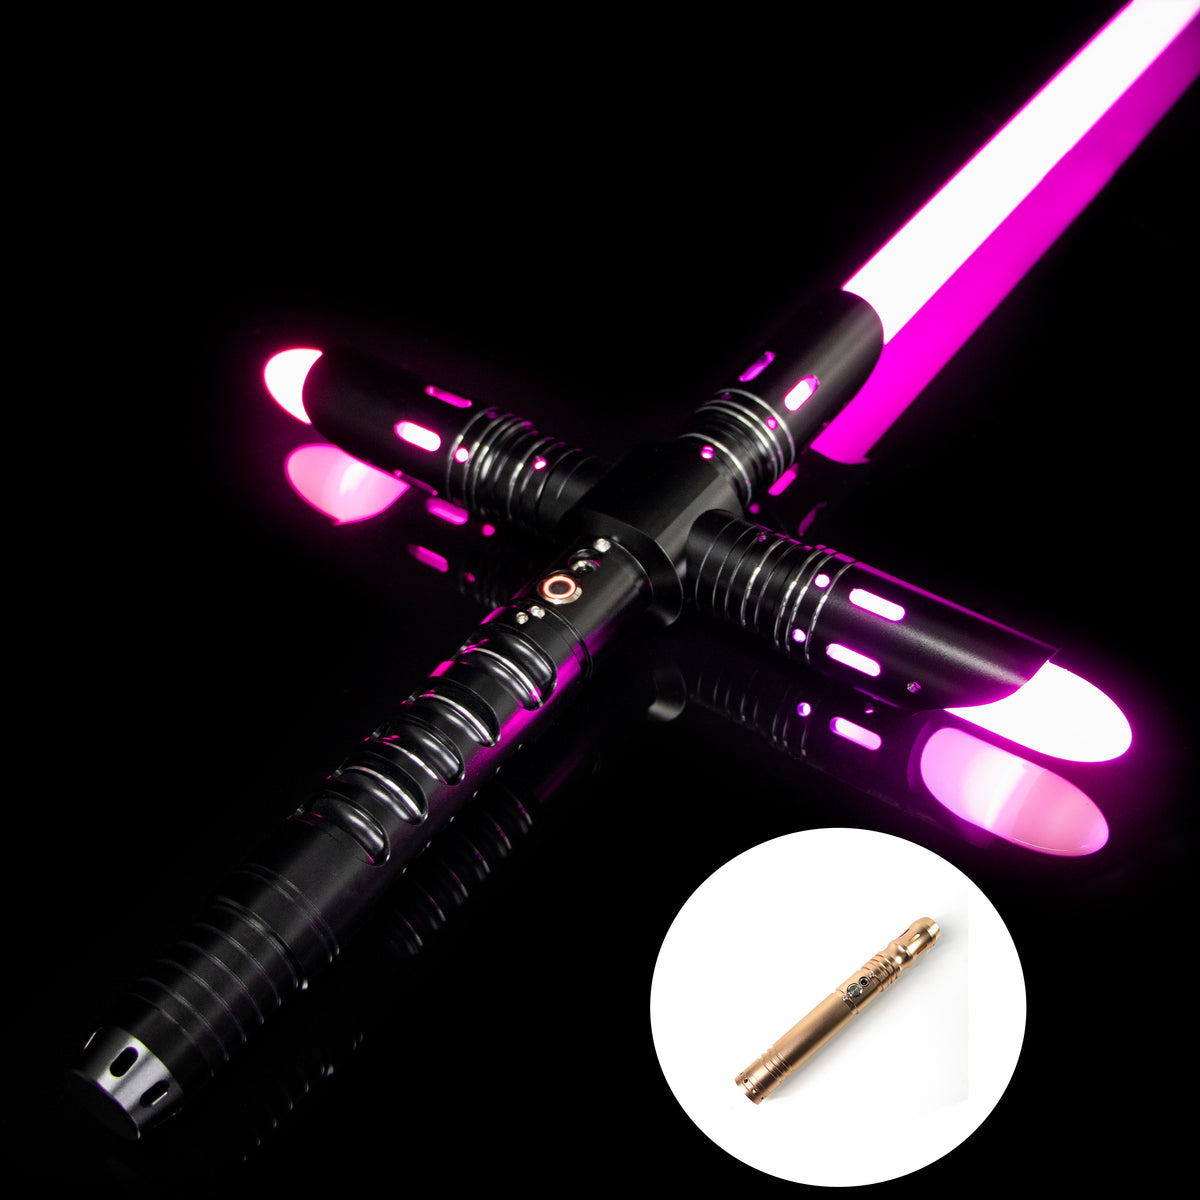 SaberCustom heavy dueling lightsaber fx smooth swing 9 sound fonts infinite color changing NO106